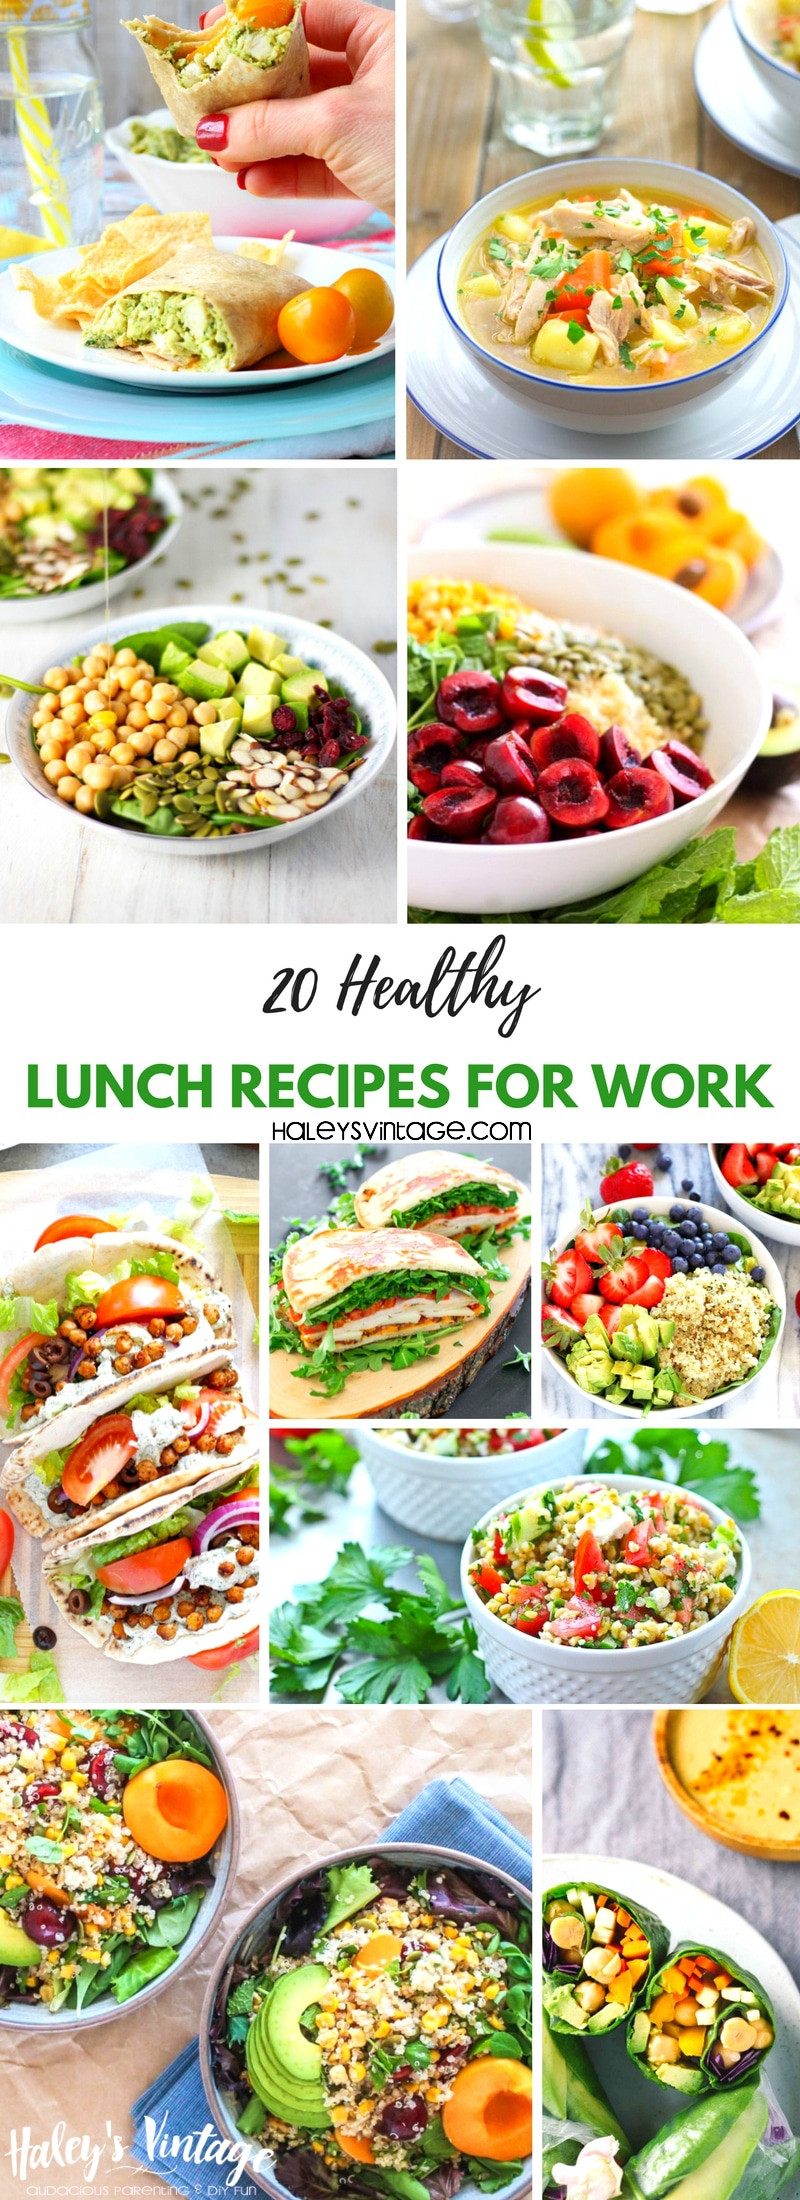 Healthy Lunches For Work
 20 Healthy Lunch Recipes for Work That Are Not Boring